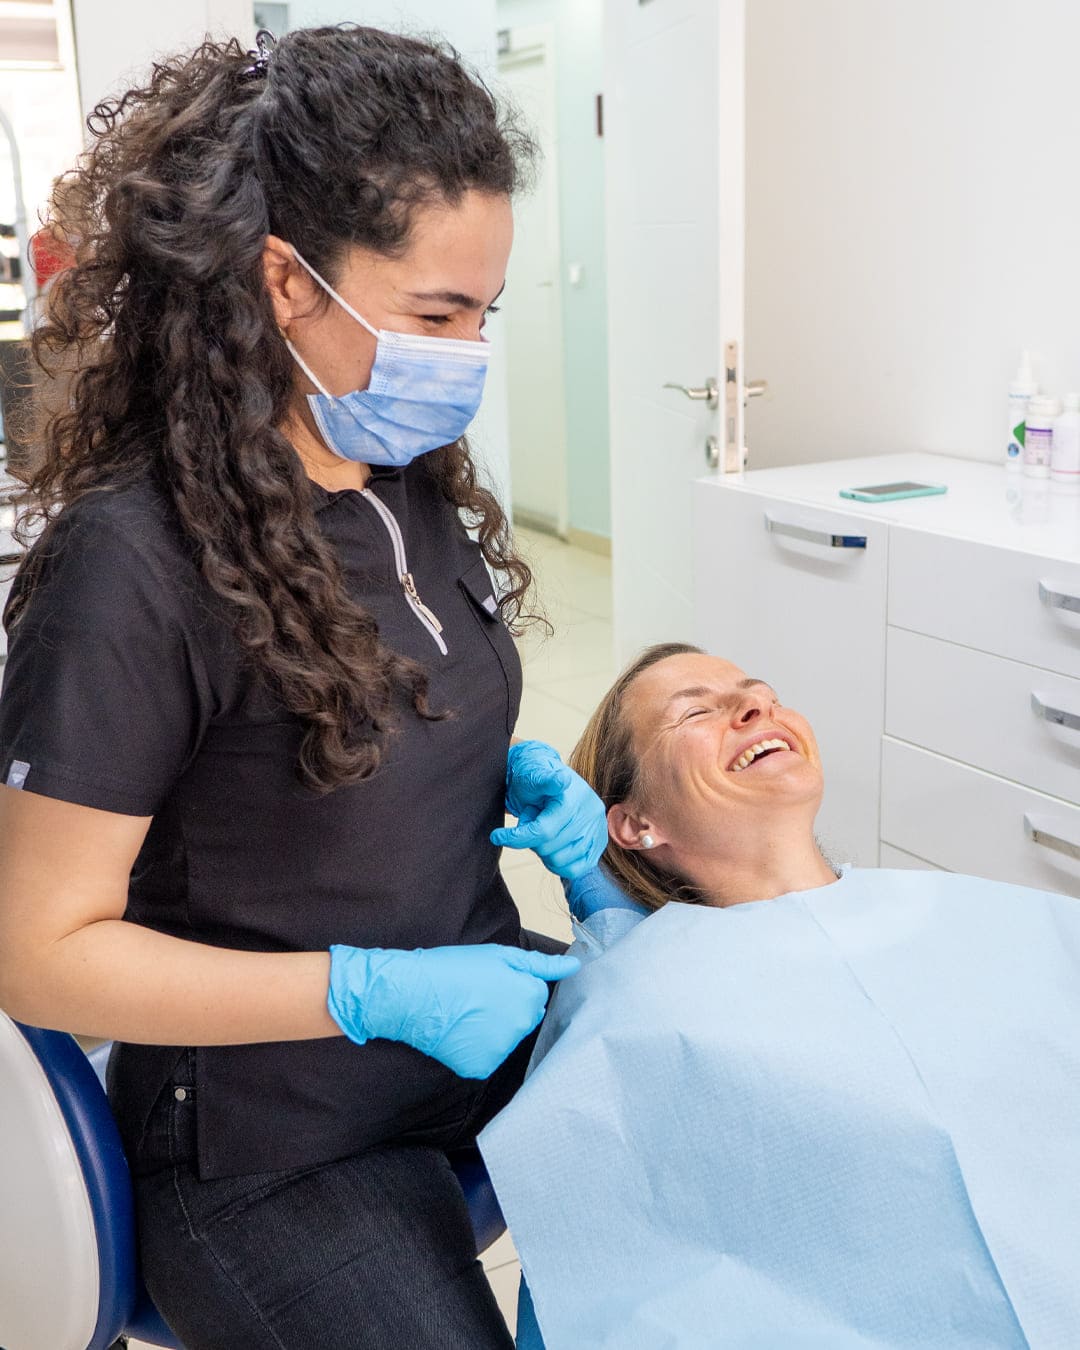 How is teeth cleaning done?